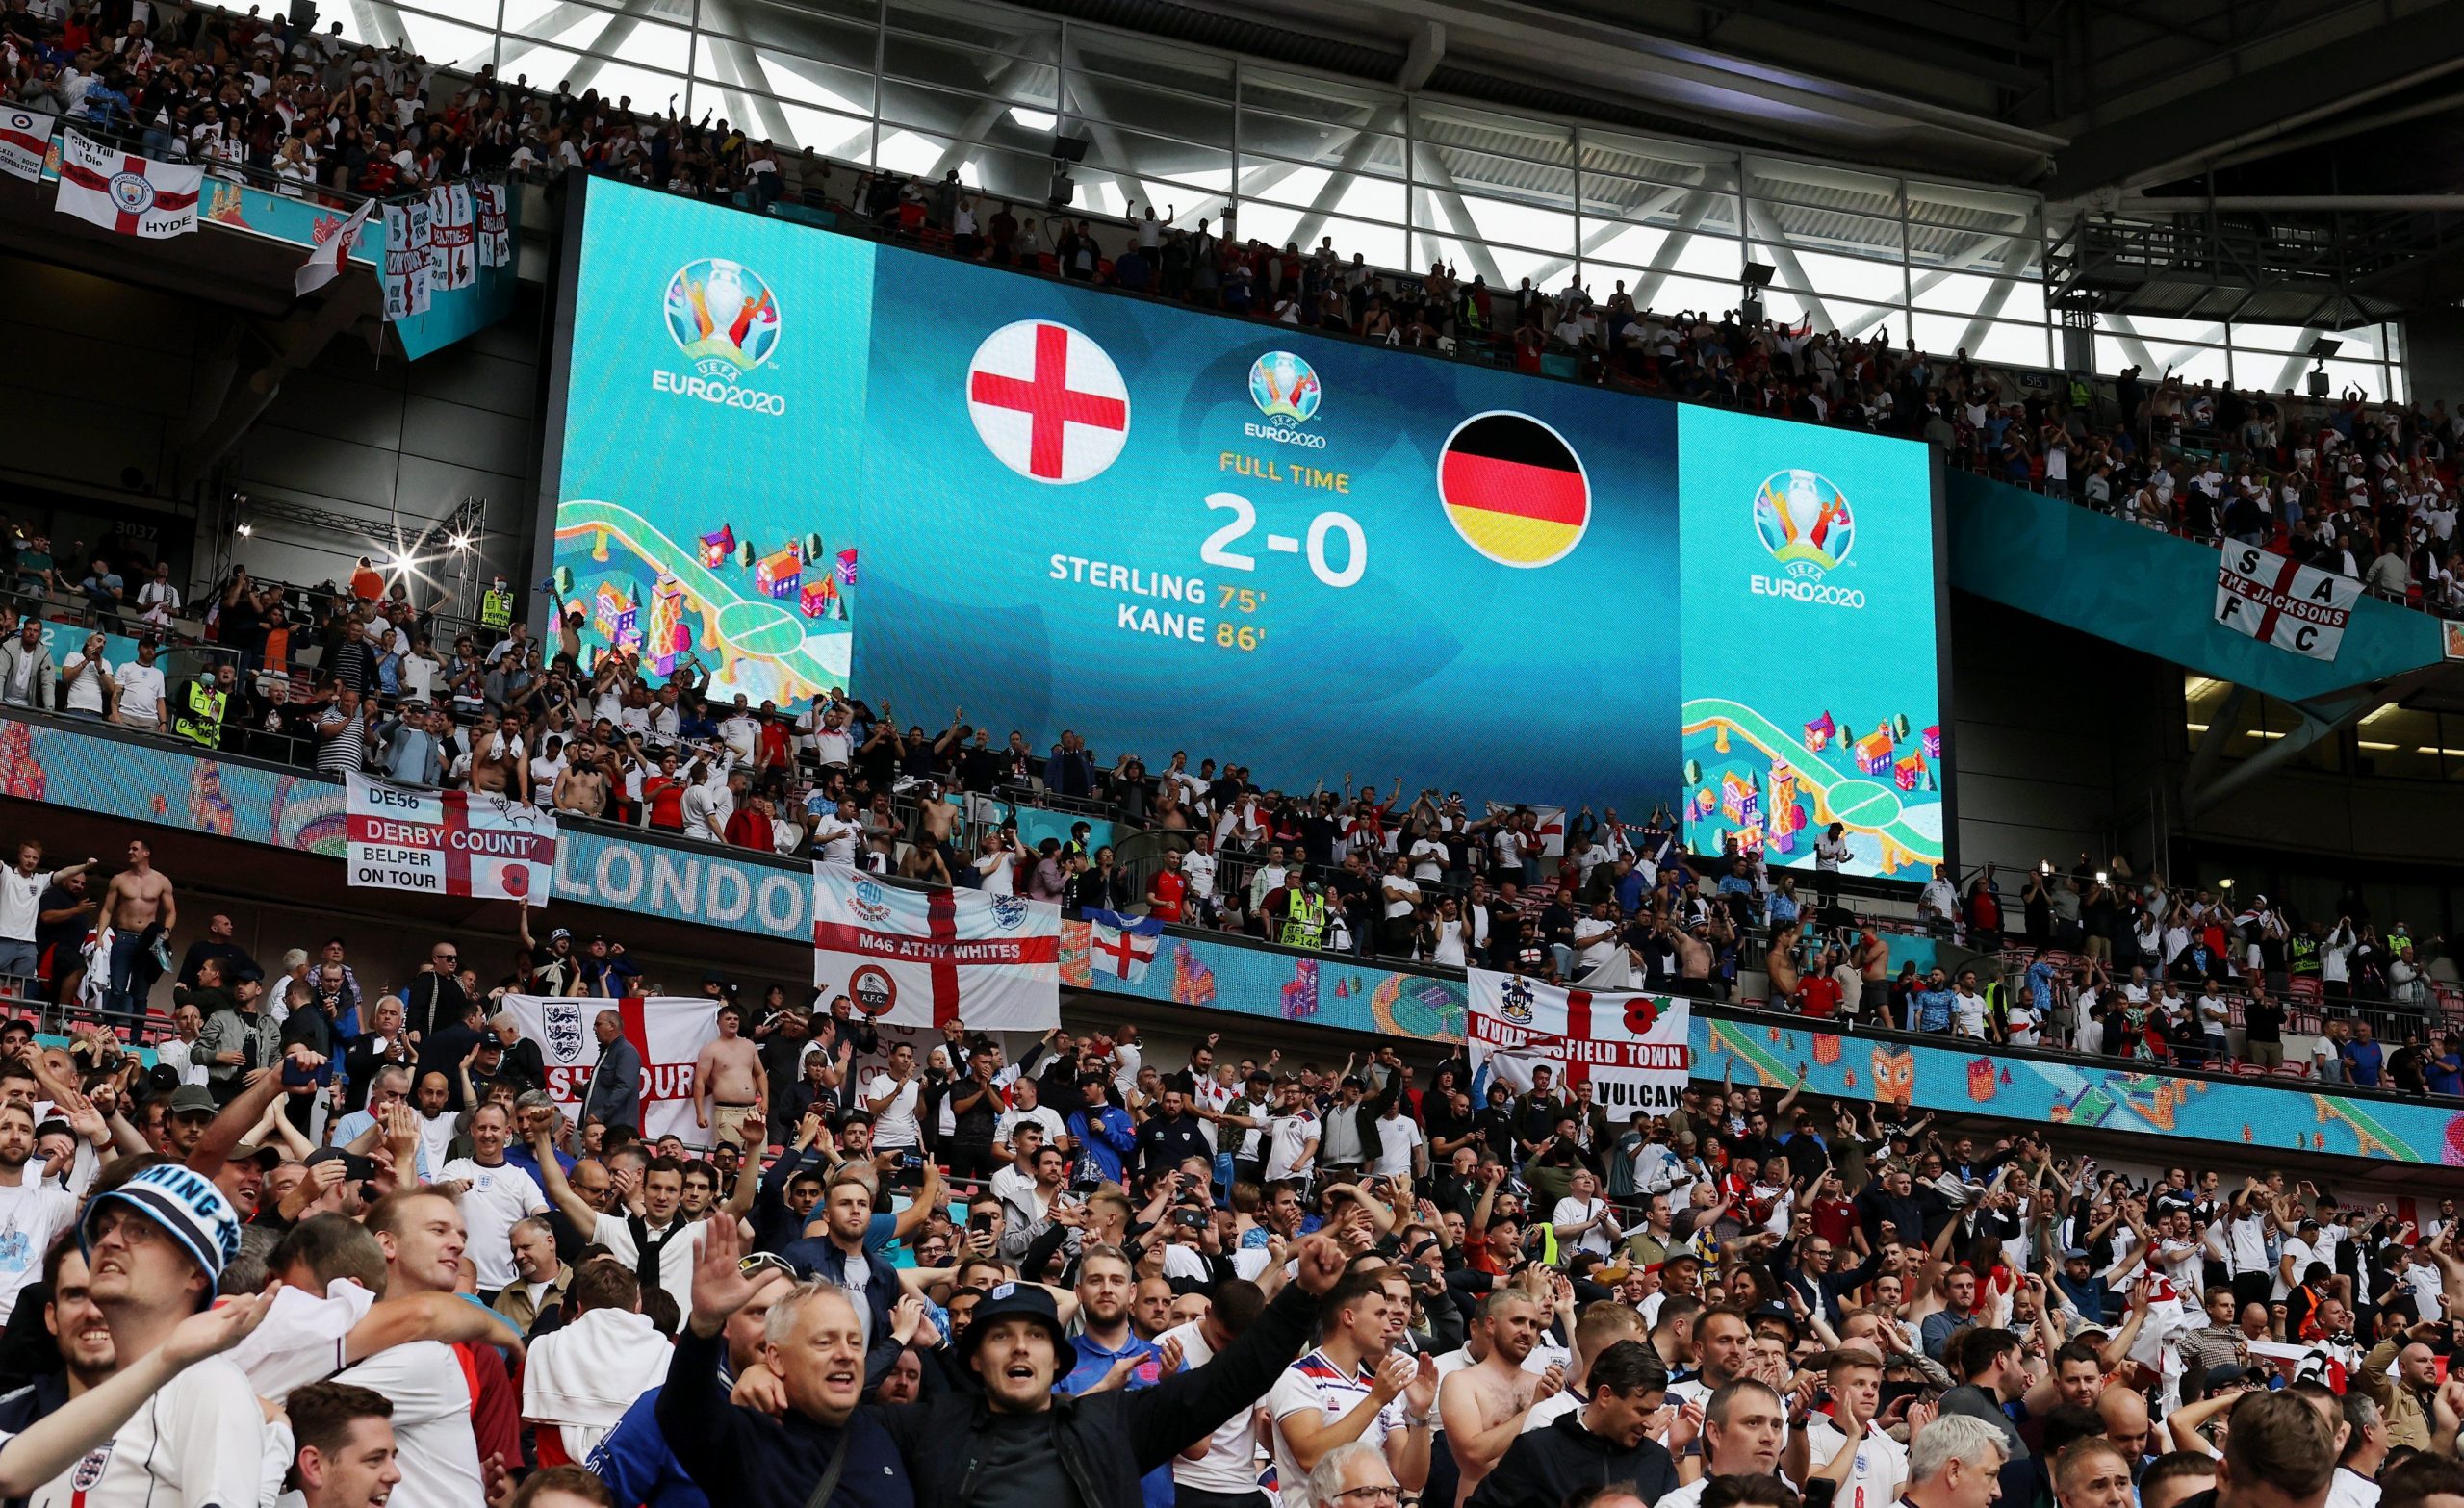 Euro 2020: Key takeaways from the England-Germany clash